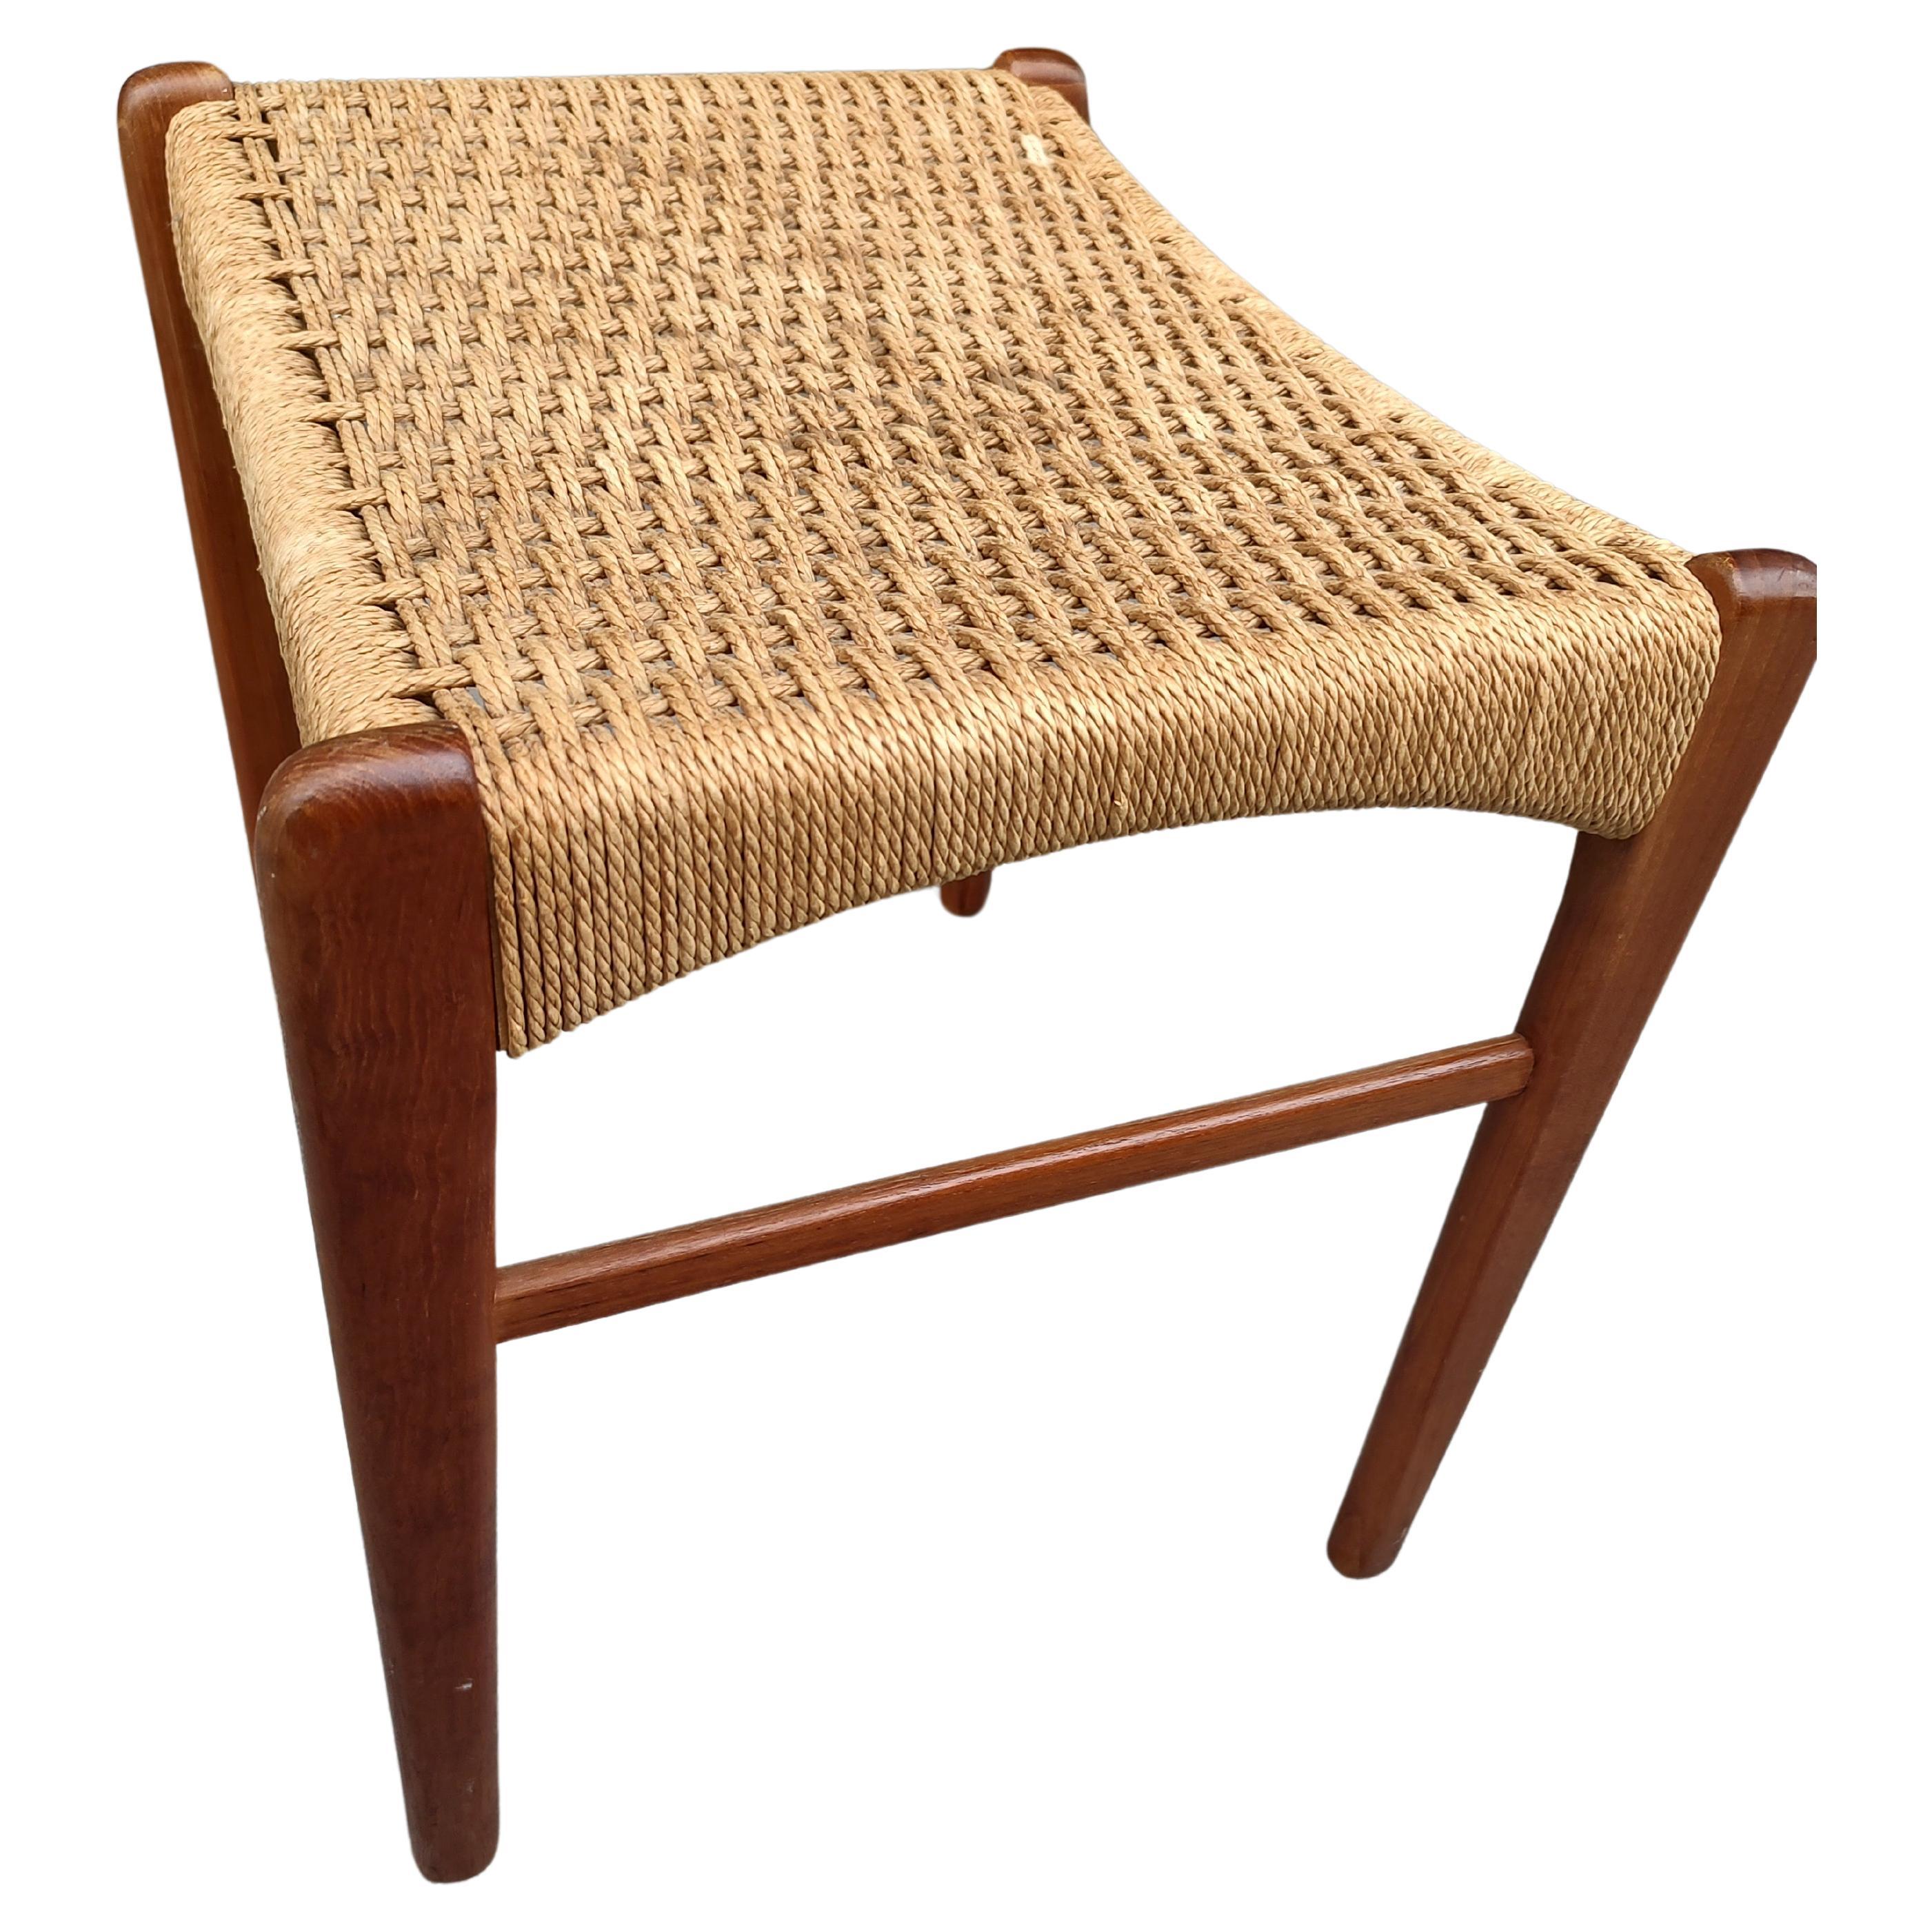 Scandinavian Modern Mid-Century Modern Danish Footstool with Woven Paper Cord Seat, 1960 For Sale